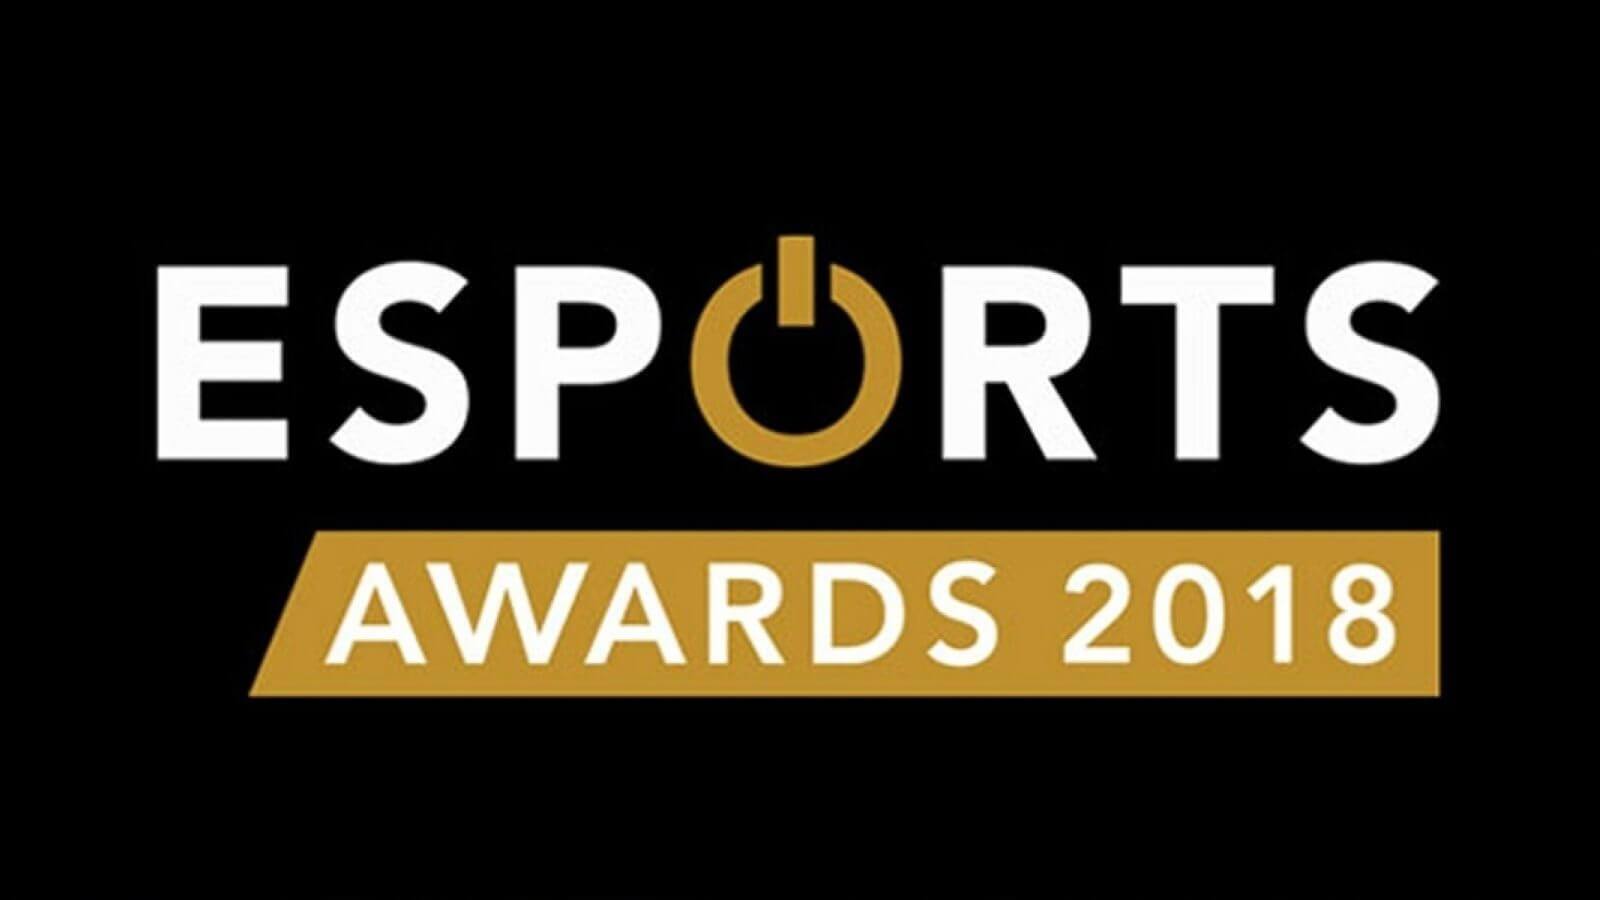 The Esports Awards 2018 offered a glimpse at the best the industry has to offer.